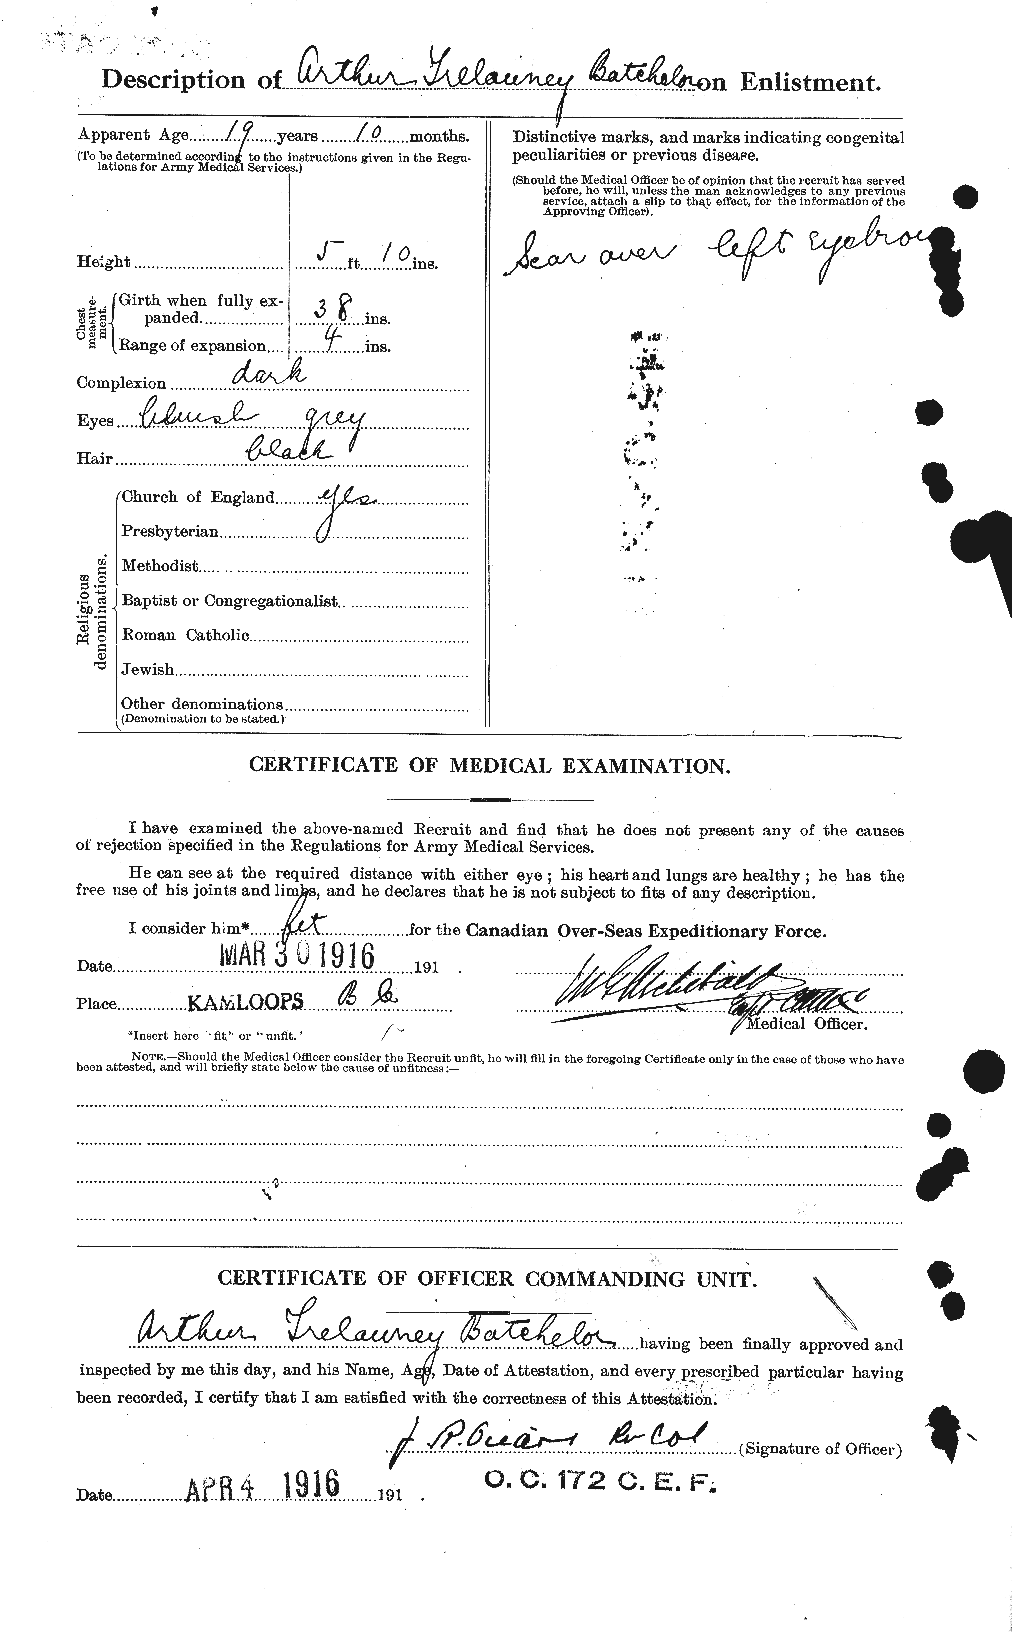 Personnel Records of the First World War - CEF 228176b